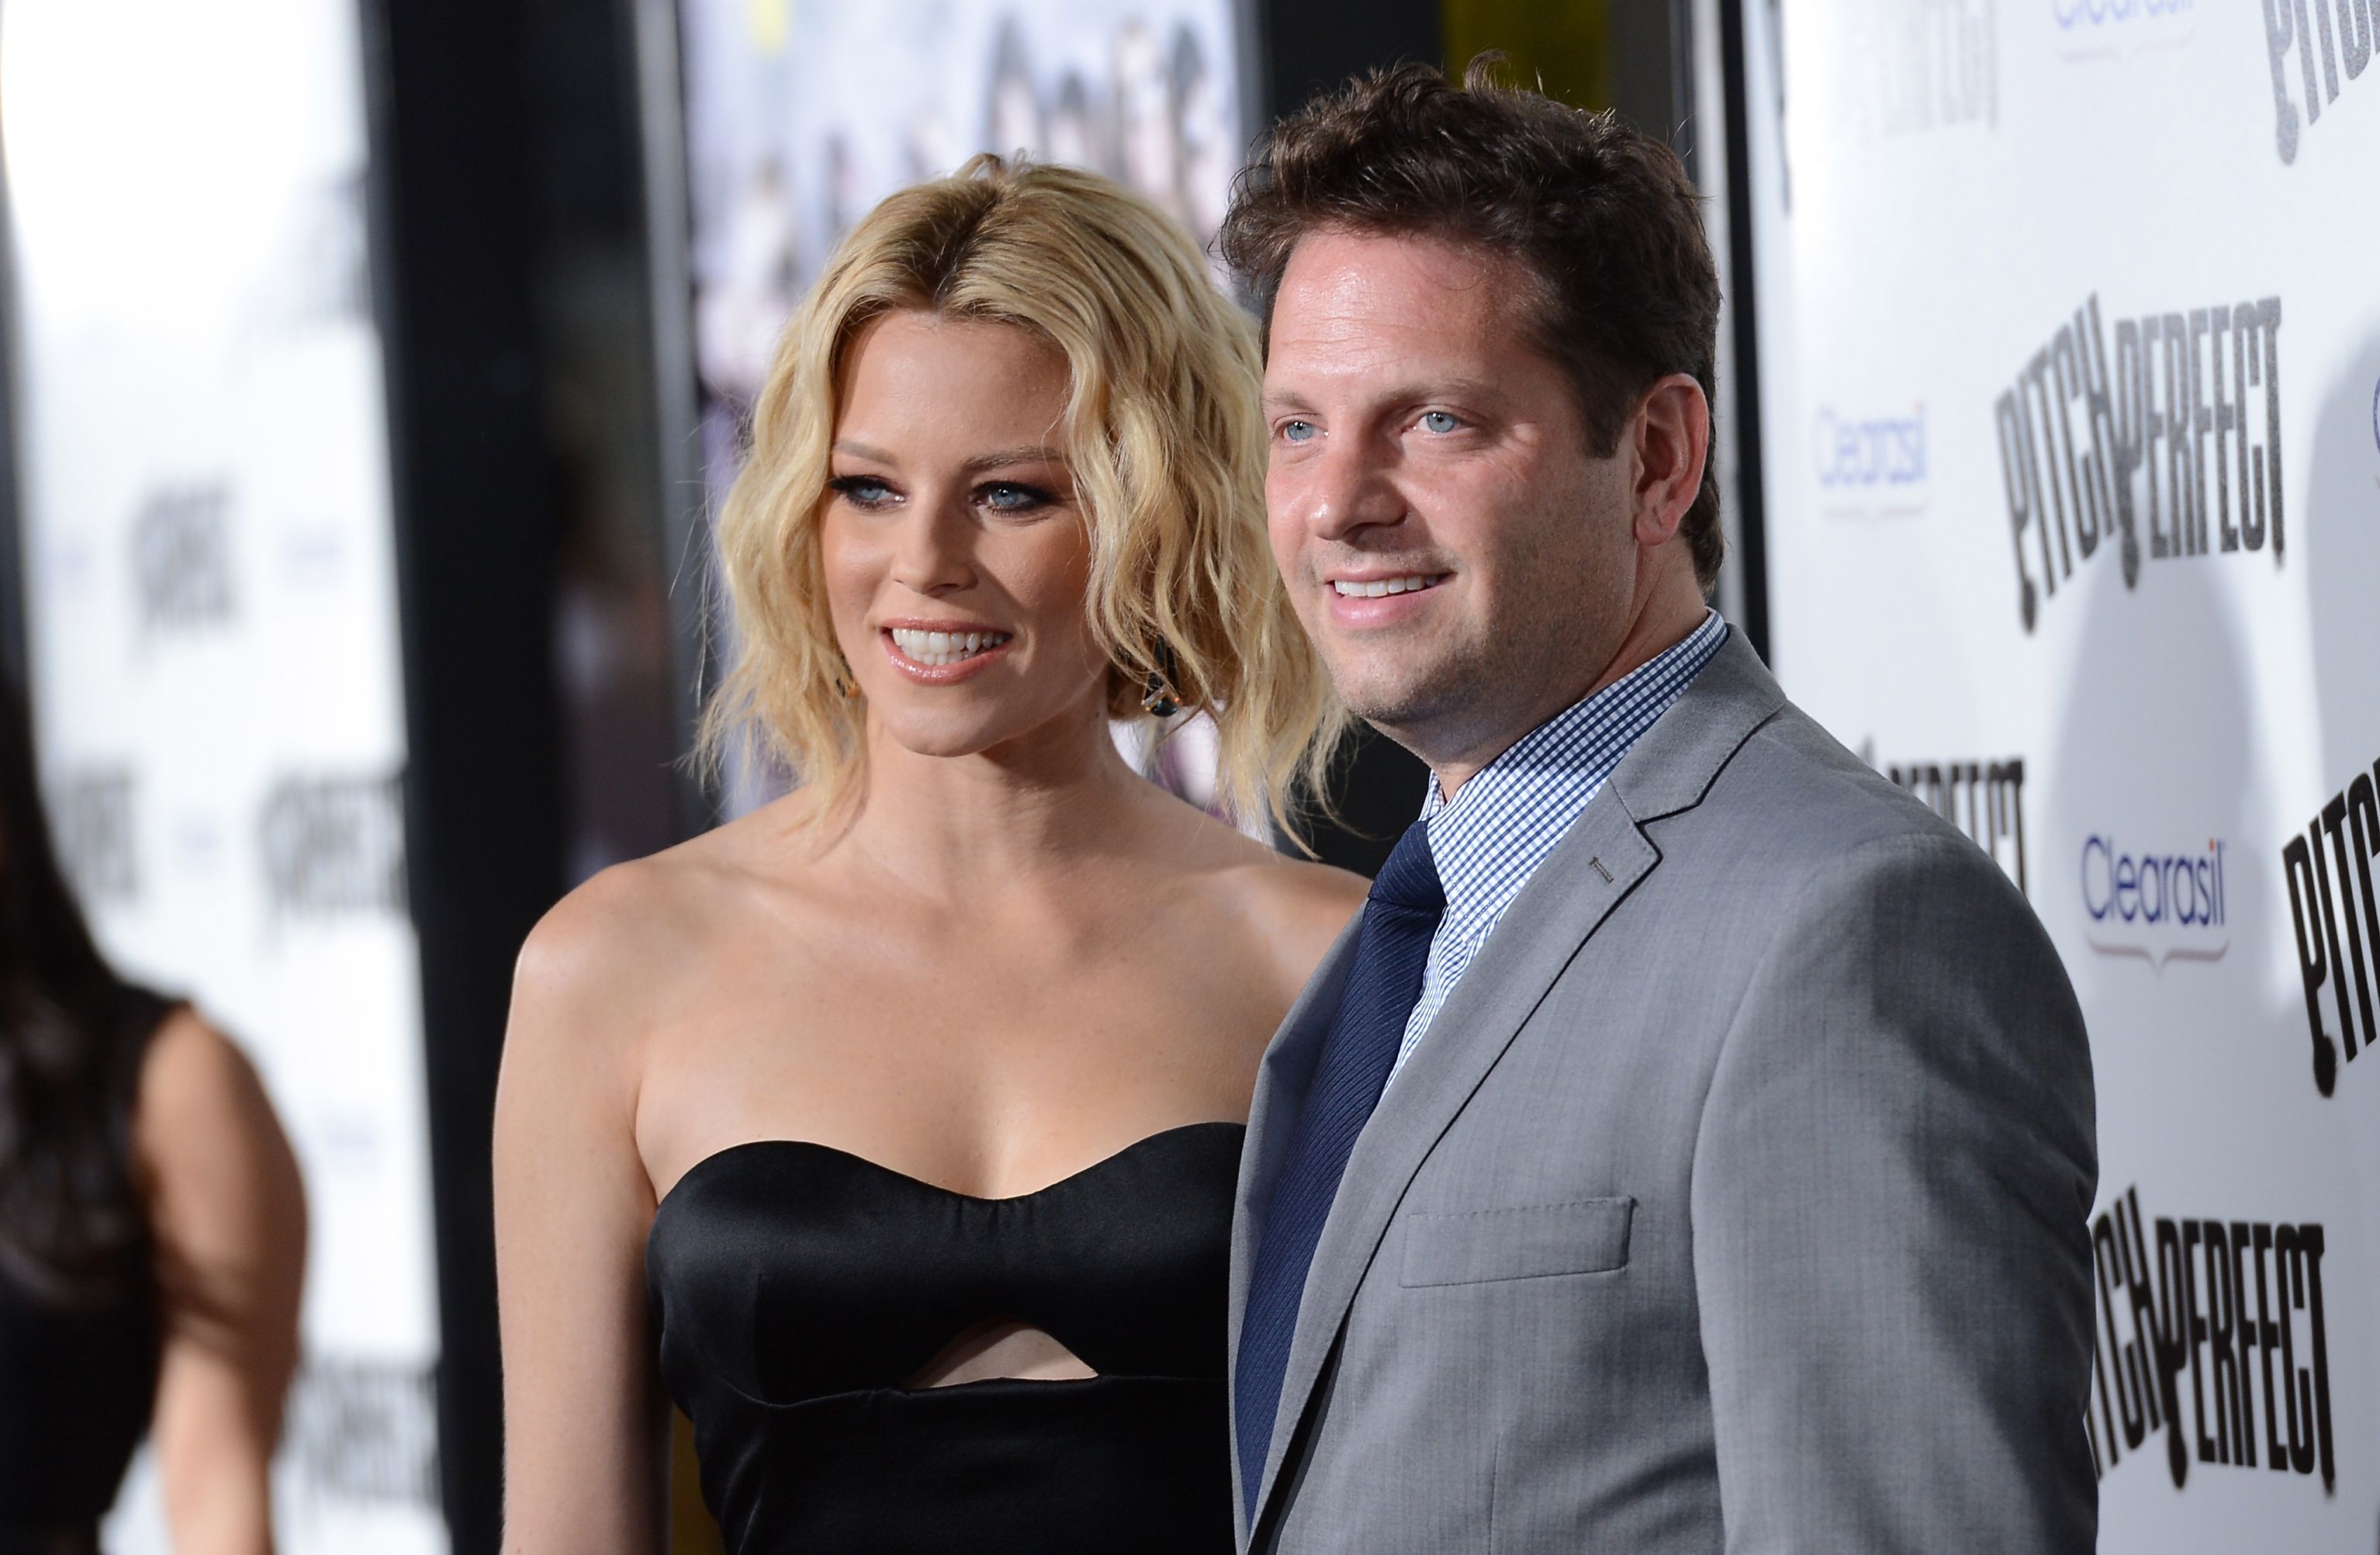 Elizabeth Banks and Max Handelman at the premiere of "Pitch Perfect" in 2012 in Hollywood, California | Source: Getty Images